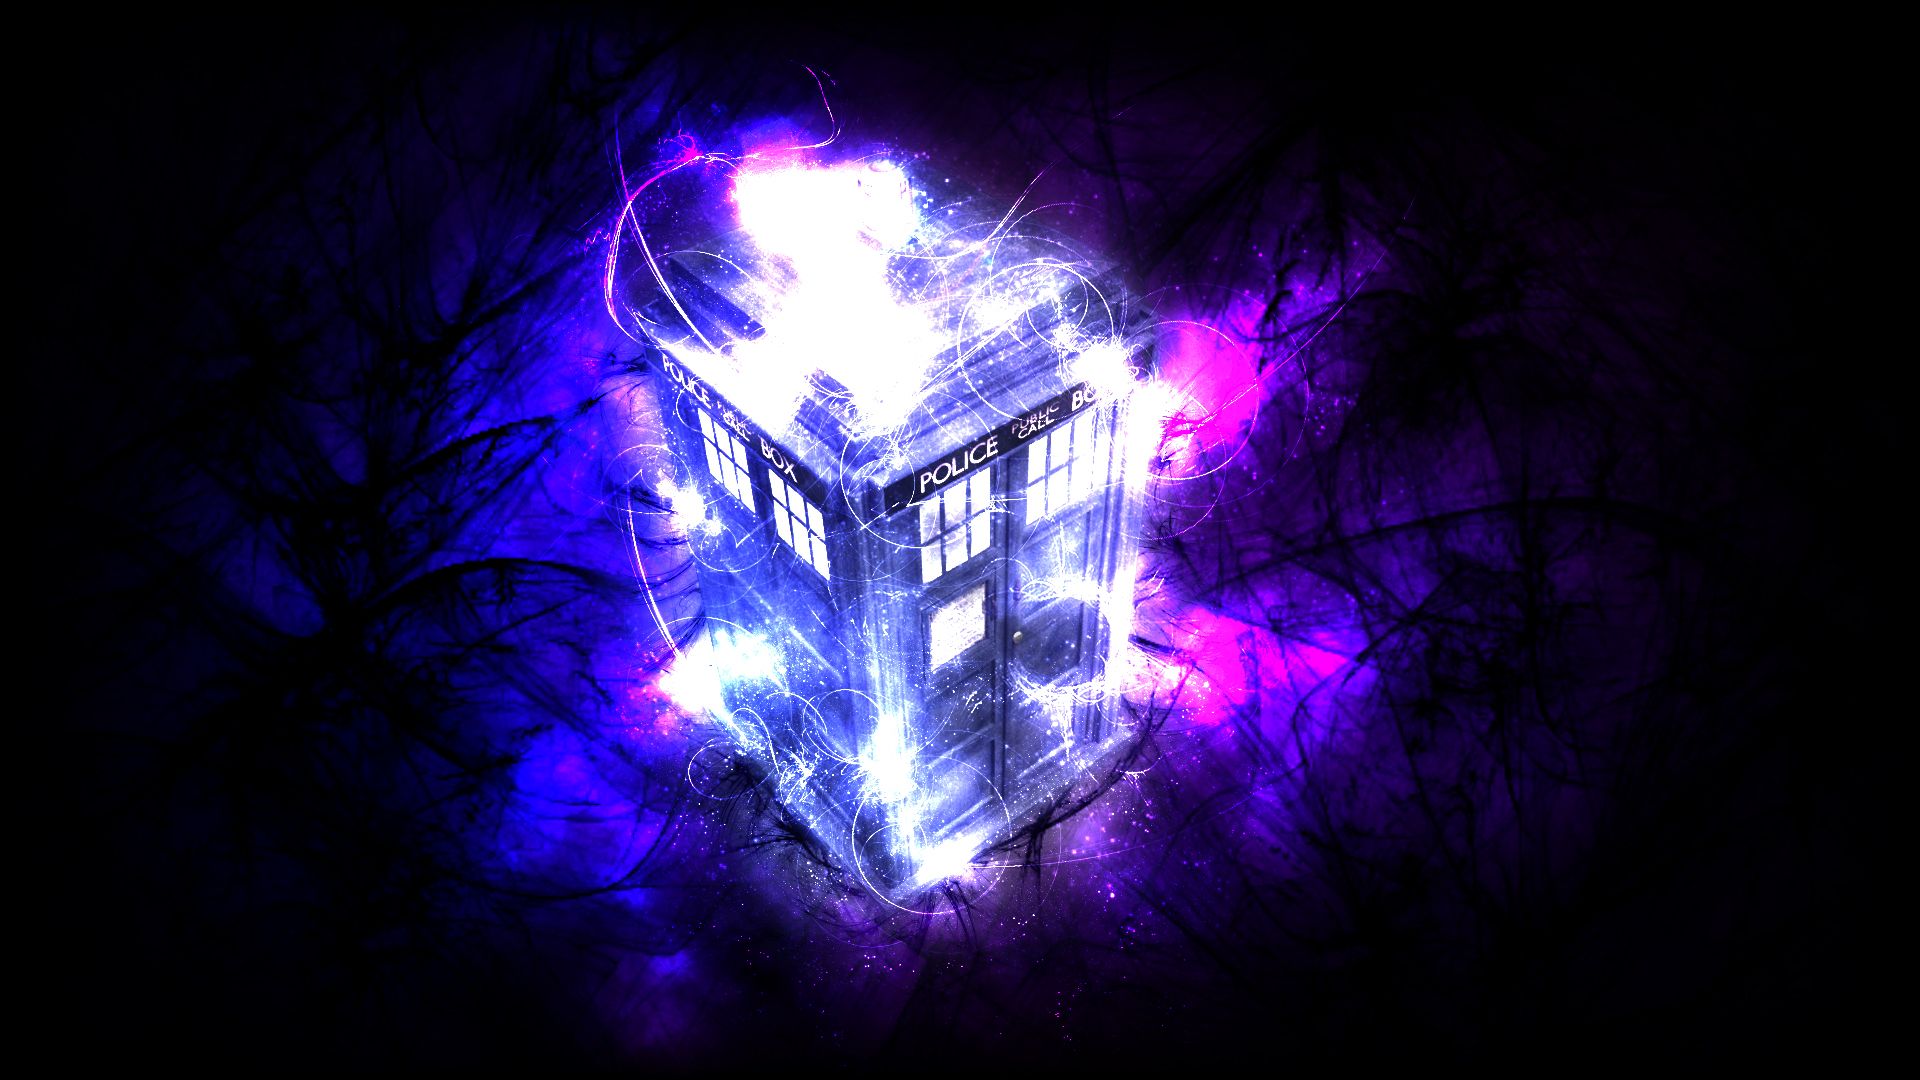 dr who images free